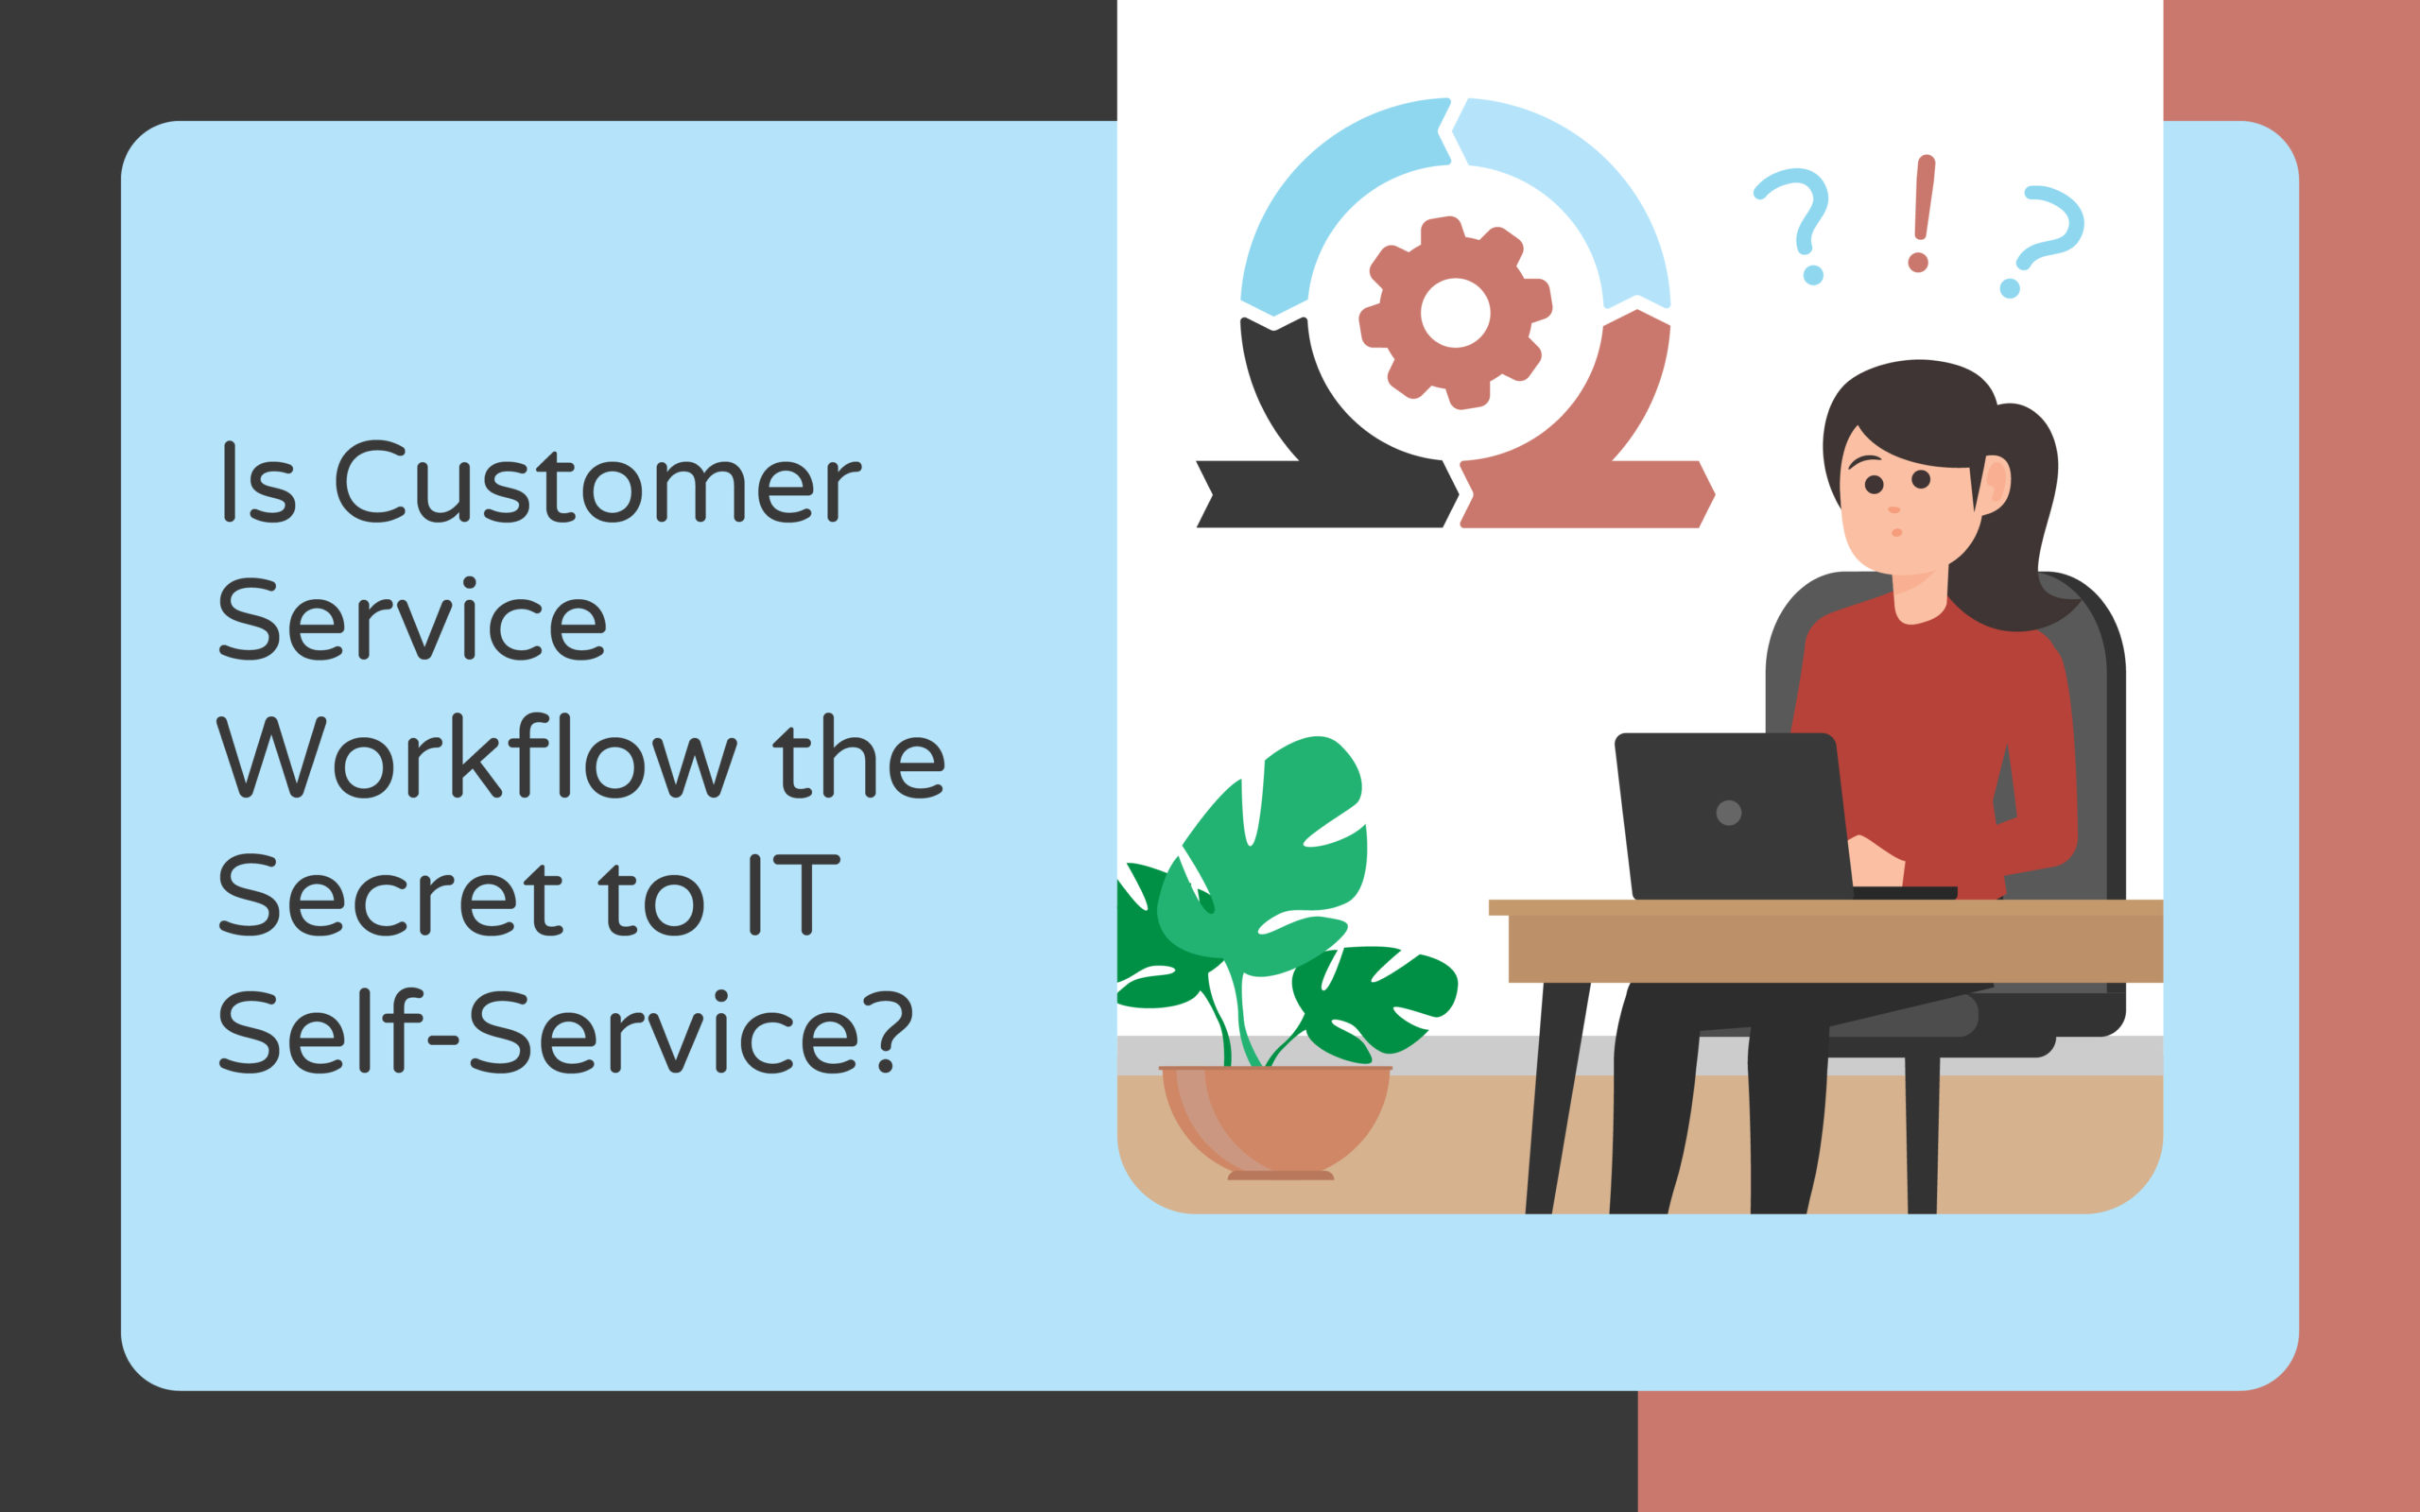 Is Customer Service Workflow the Secret to IT Self-Service